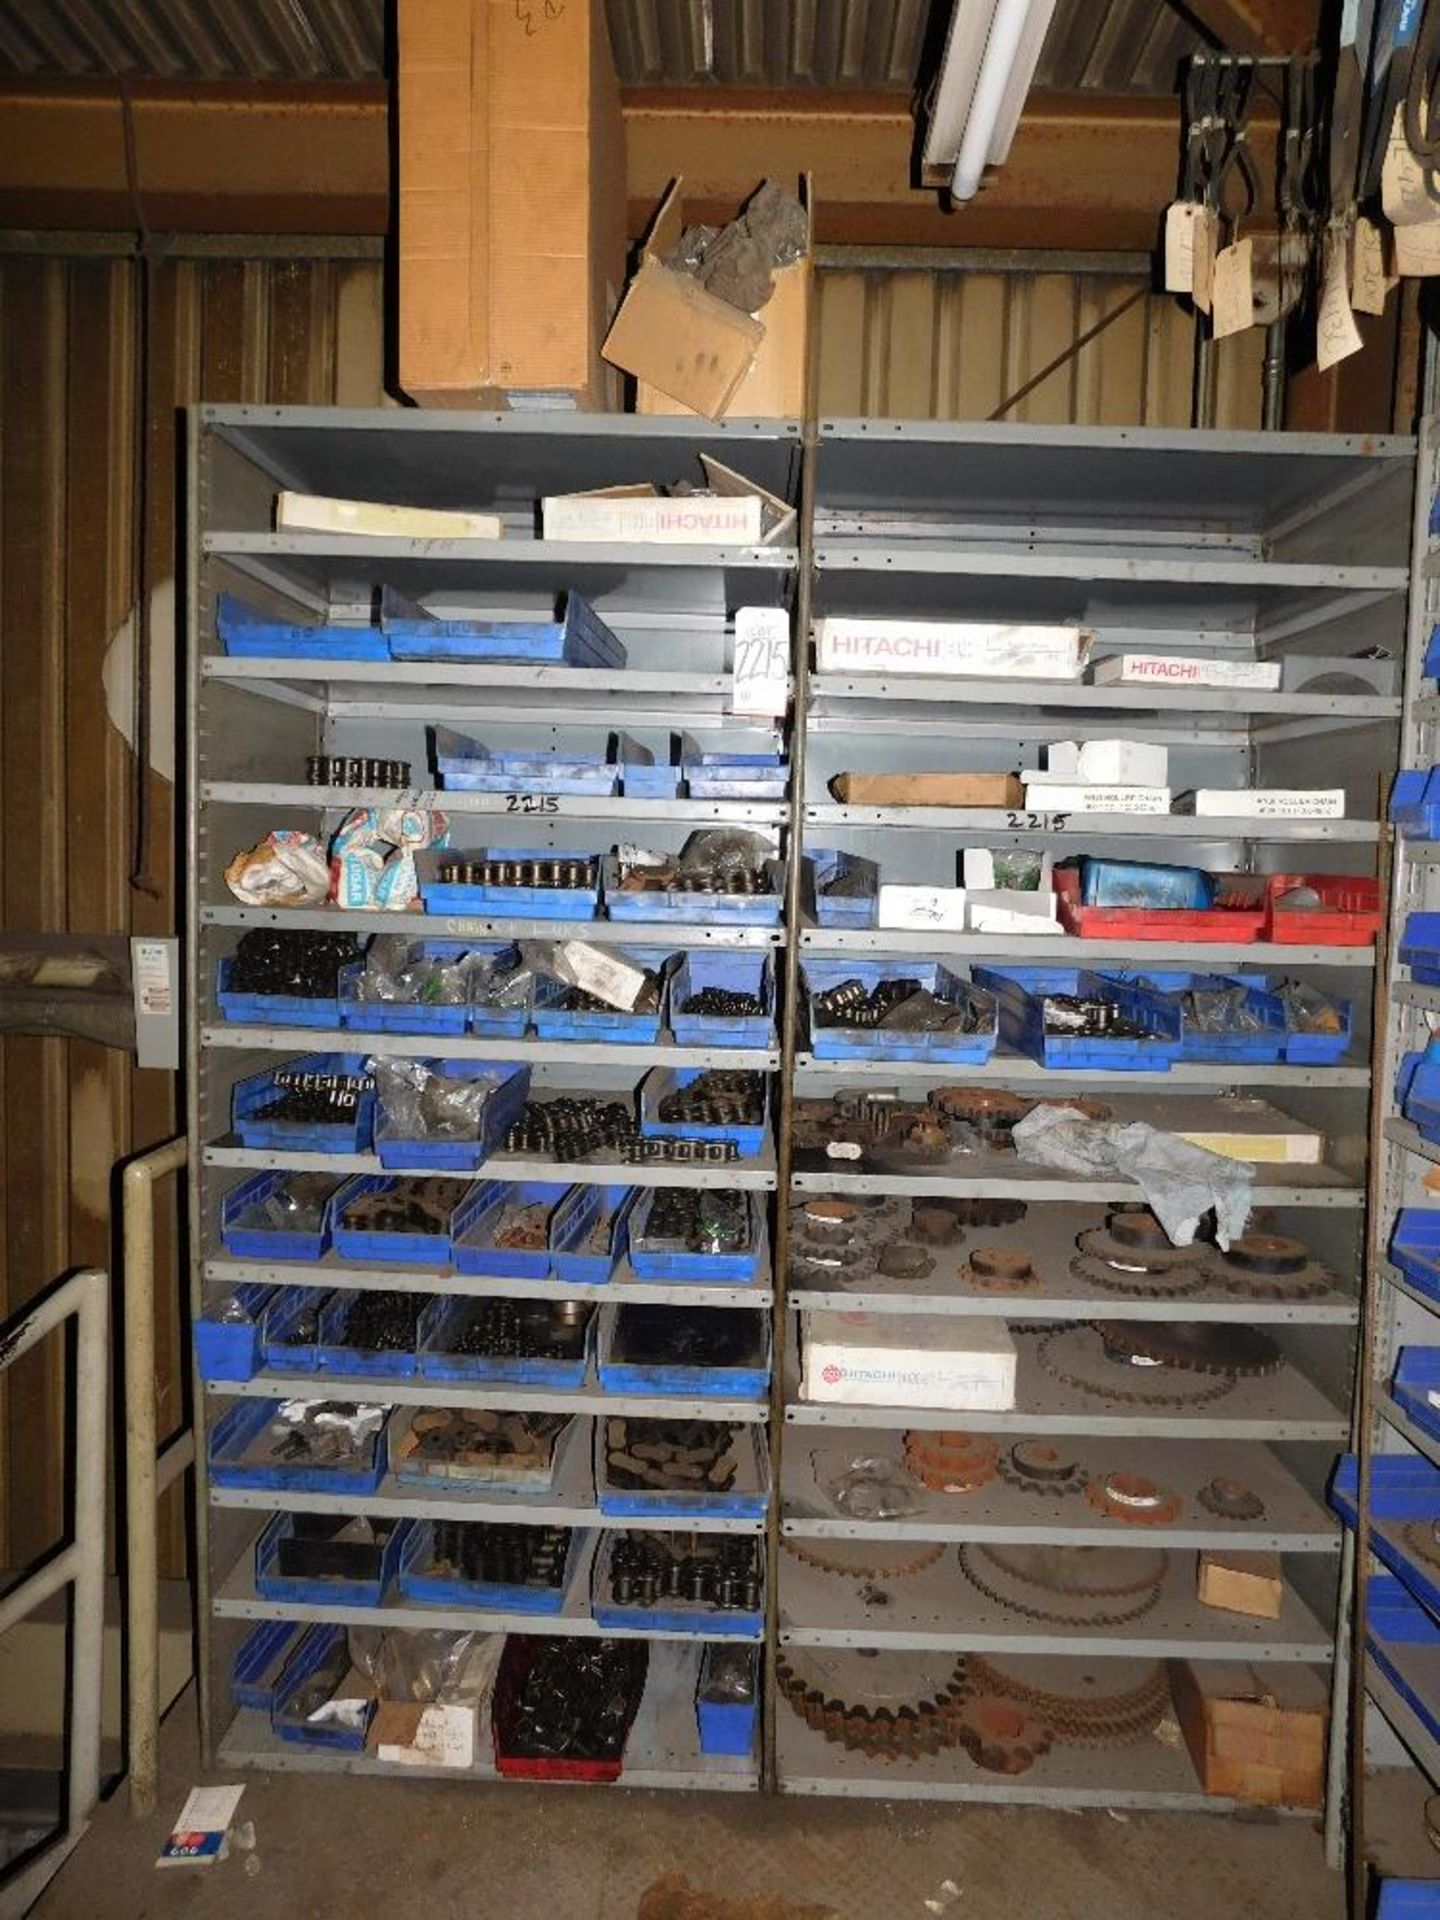 LOT - (2) 3' SHELF UNITS FULL OF STEEL SPROCKET CHAIN AND SPROCKETS, VARIOUS SIZES